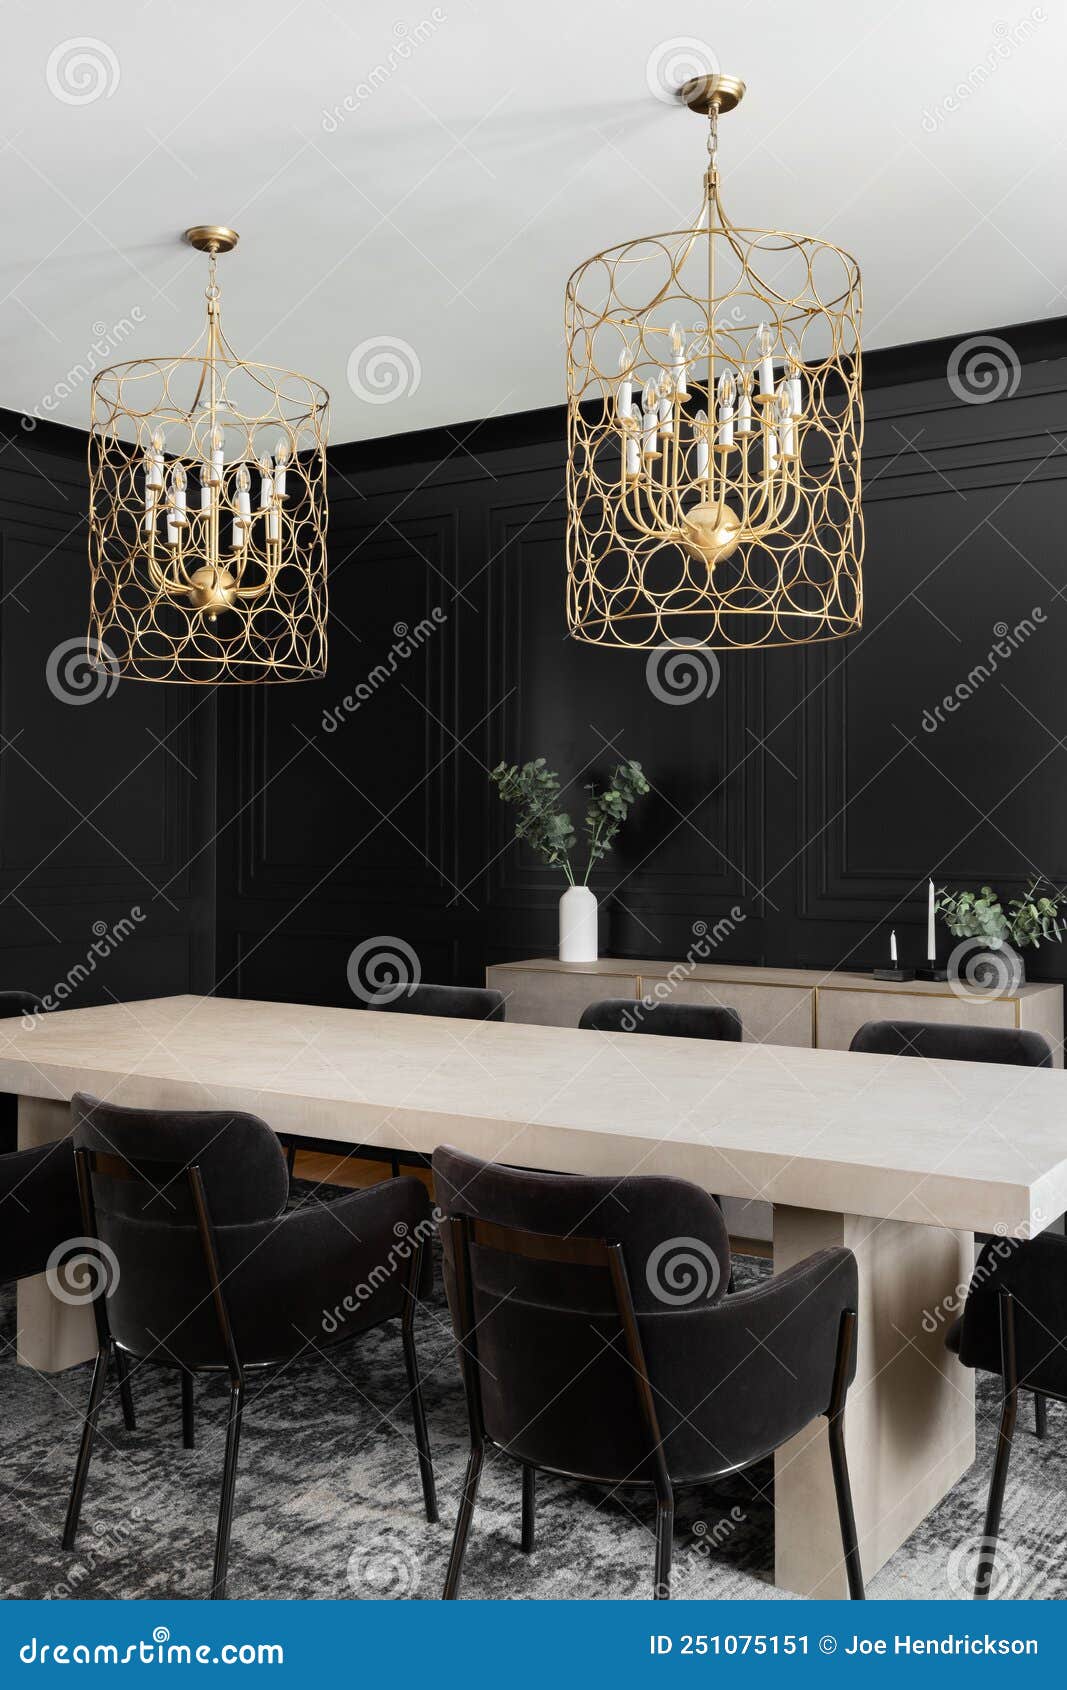 a black dining room with wainscoting walls and gold chandelier.